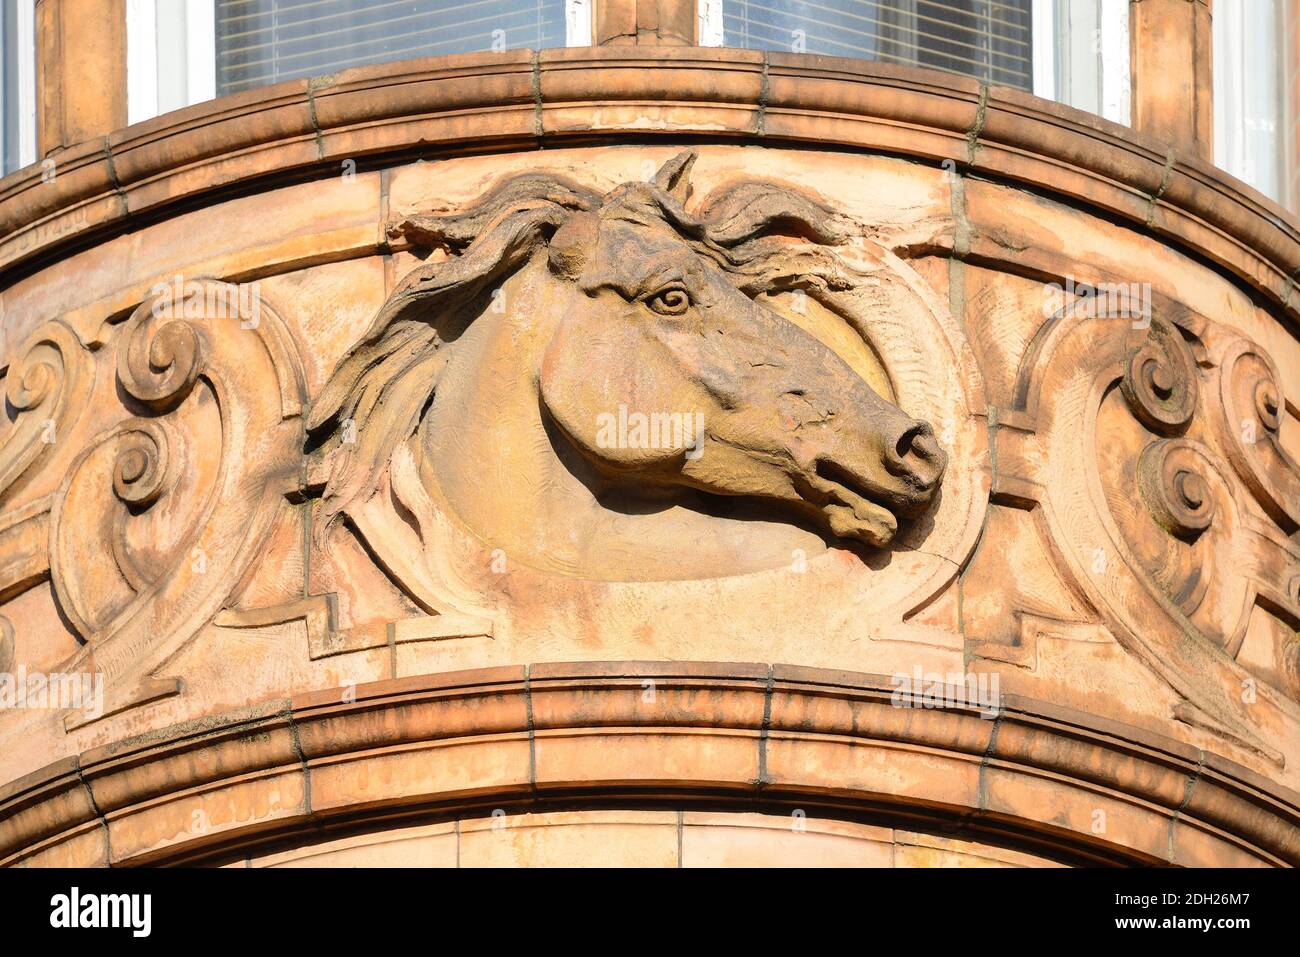 London, England, UK. Detail from the facade of the Nag's Head pub in Floral Street, Covent Garden. Stock Photo